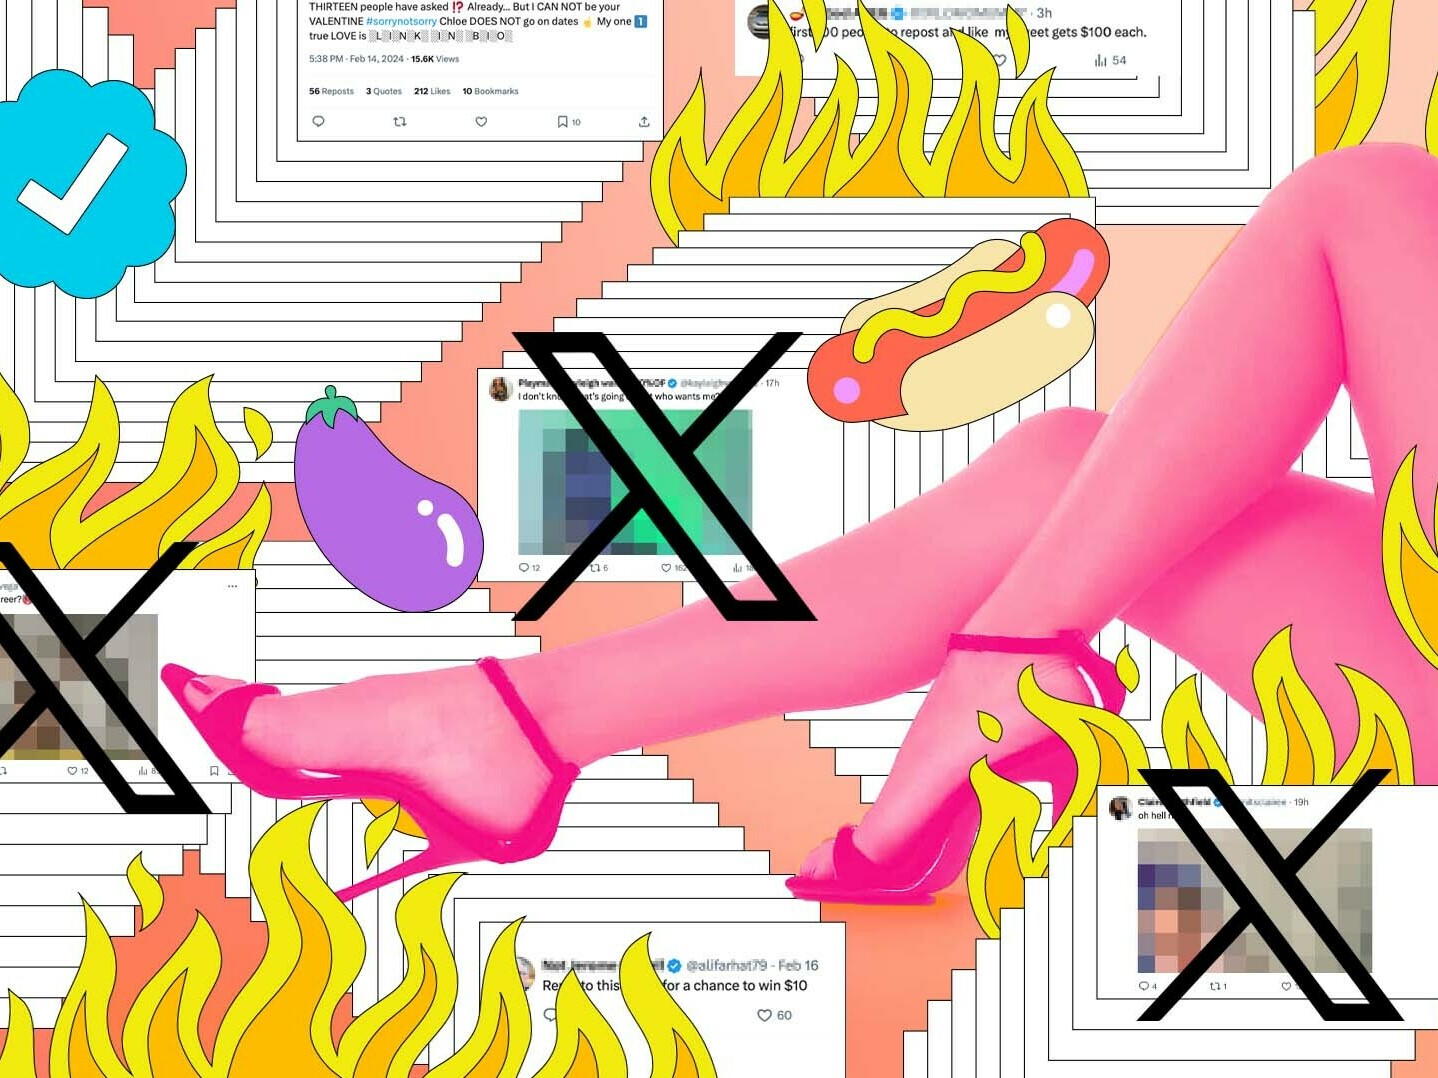 How the porn bots took over Twitter